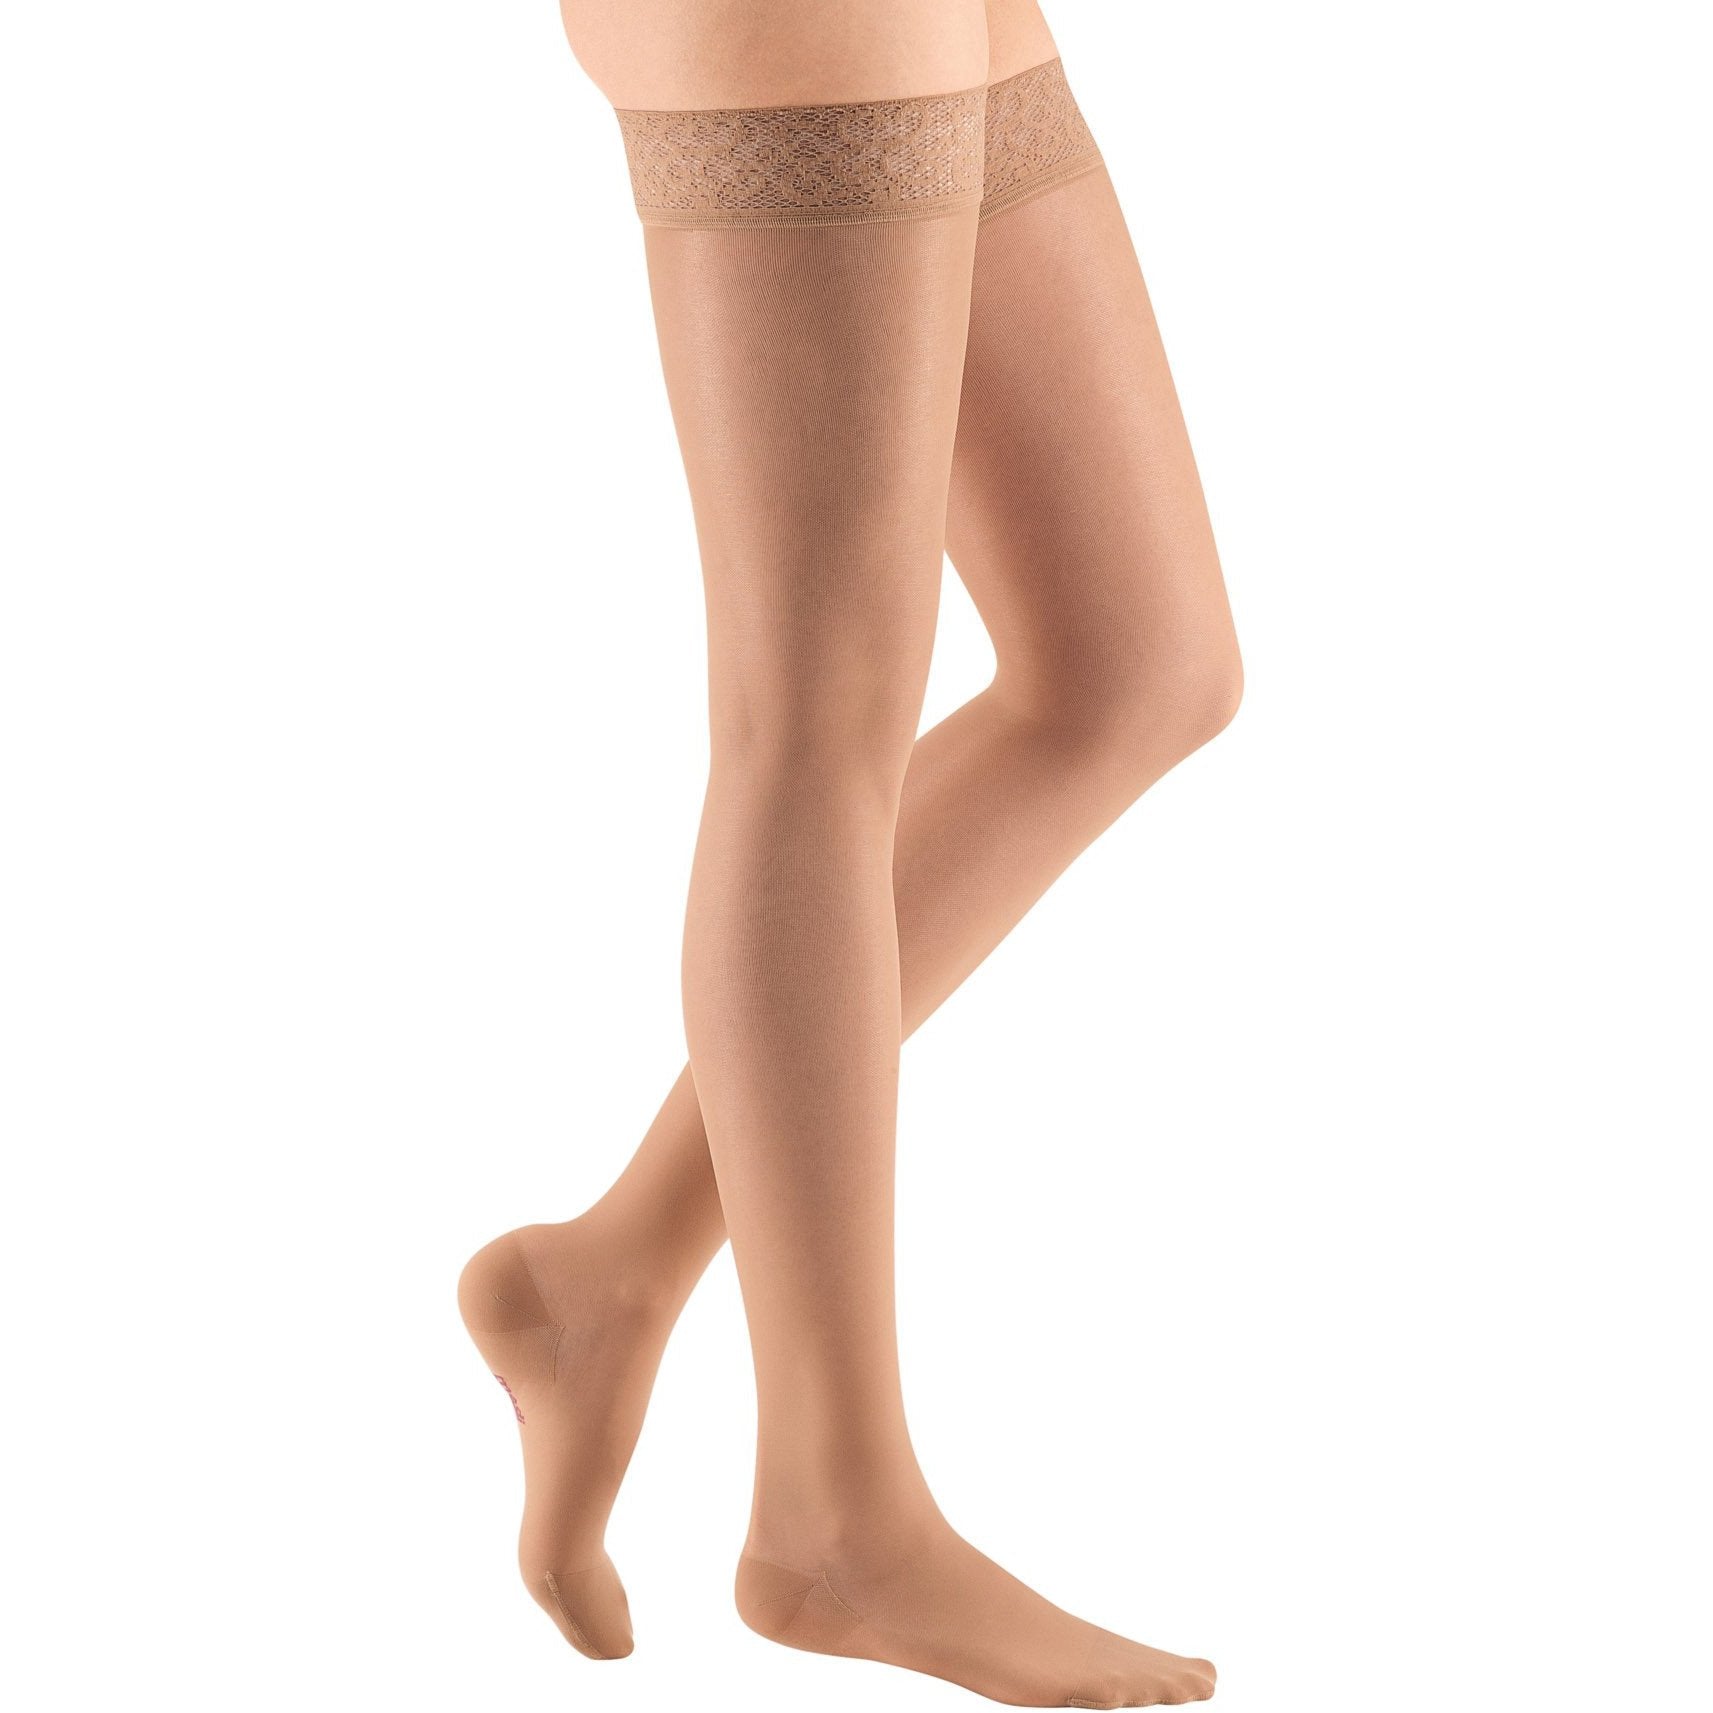 mediven sheer & soft, 8-15 mmHg, Thigh High with Lace Top-Band, Closed Toe